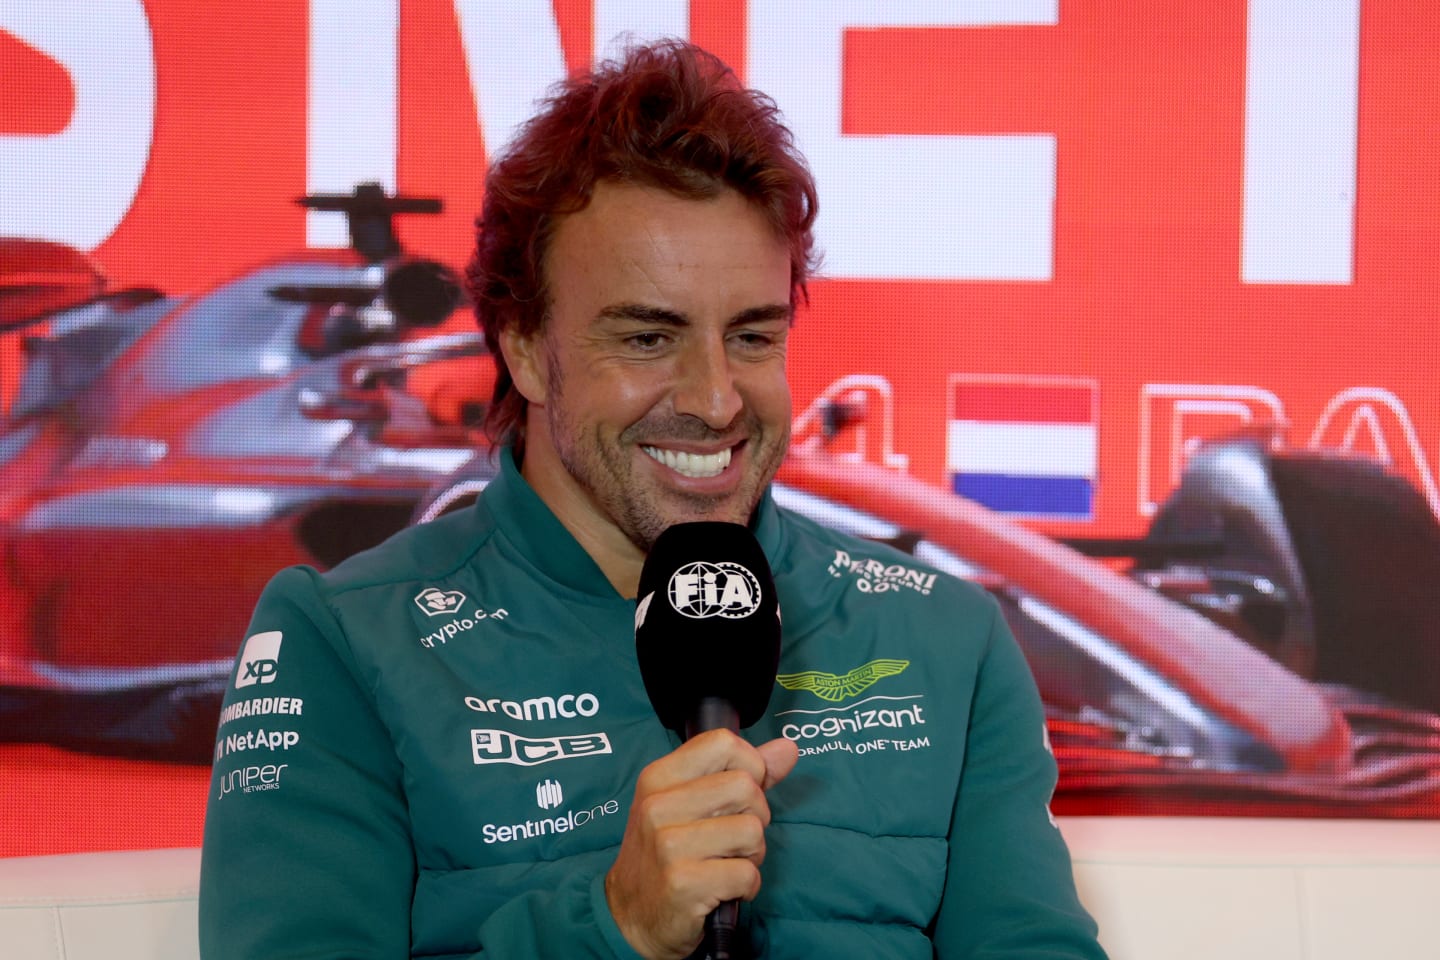 ZANDVOORT, NETHERLANDS - AUGUST 24: Fernando Alonso of Spain and Aston Martin F1 Team attends the Drivers Press Conference during previews ahead of the F1 Grand Prix of The Netherlands at Circuit Zandvoort on August 24, 2023 in Zandvoort, Netherlands. (Photo by Dean Mouhtaropoulos/Getty Images)